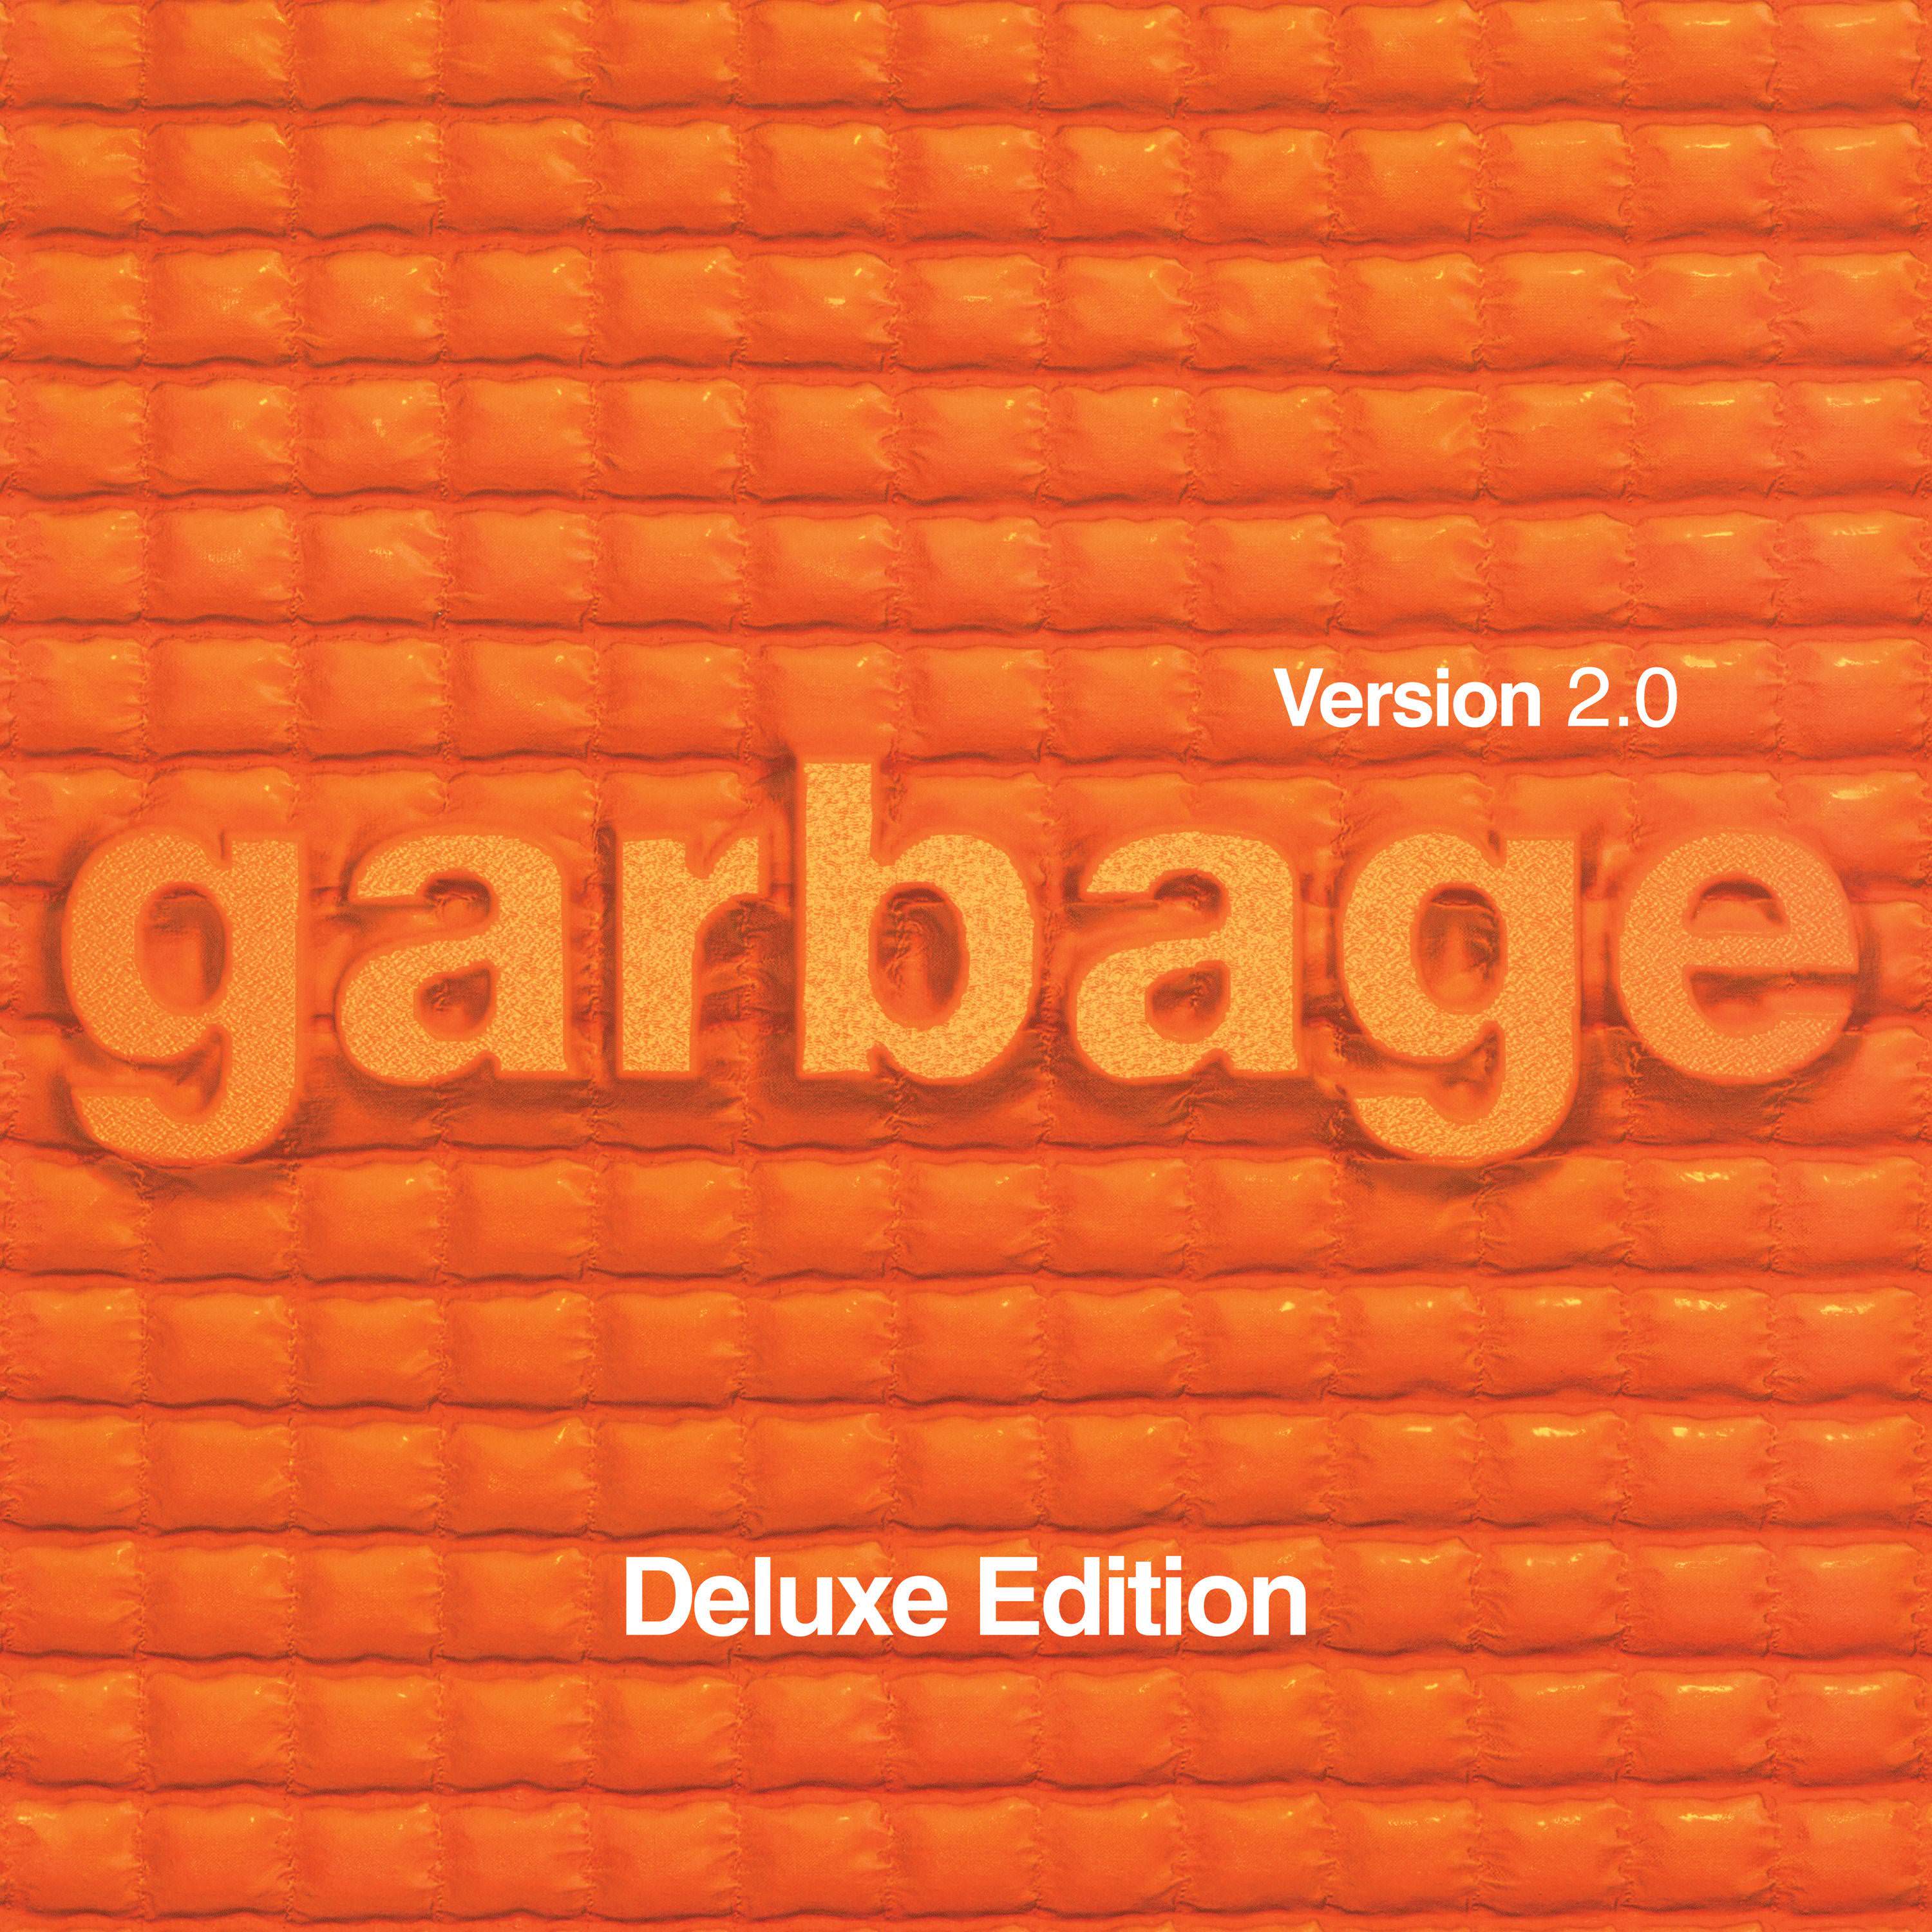 Garbage - Version 2.0 (20th Anniversary Deluxe Edition / Remastered) (1998/2018) [FLAC 24bit/44,1kHz]